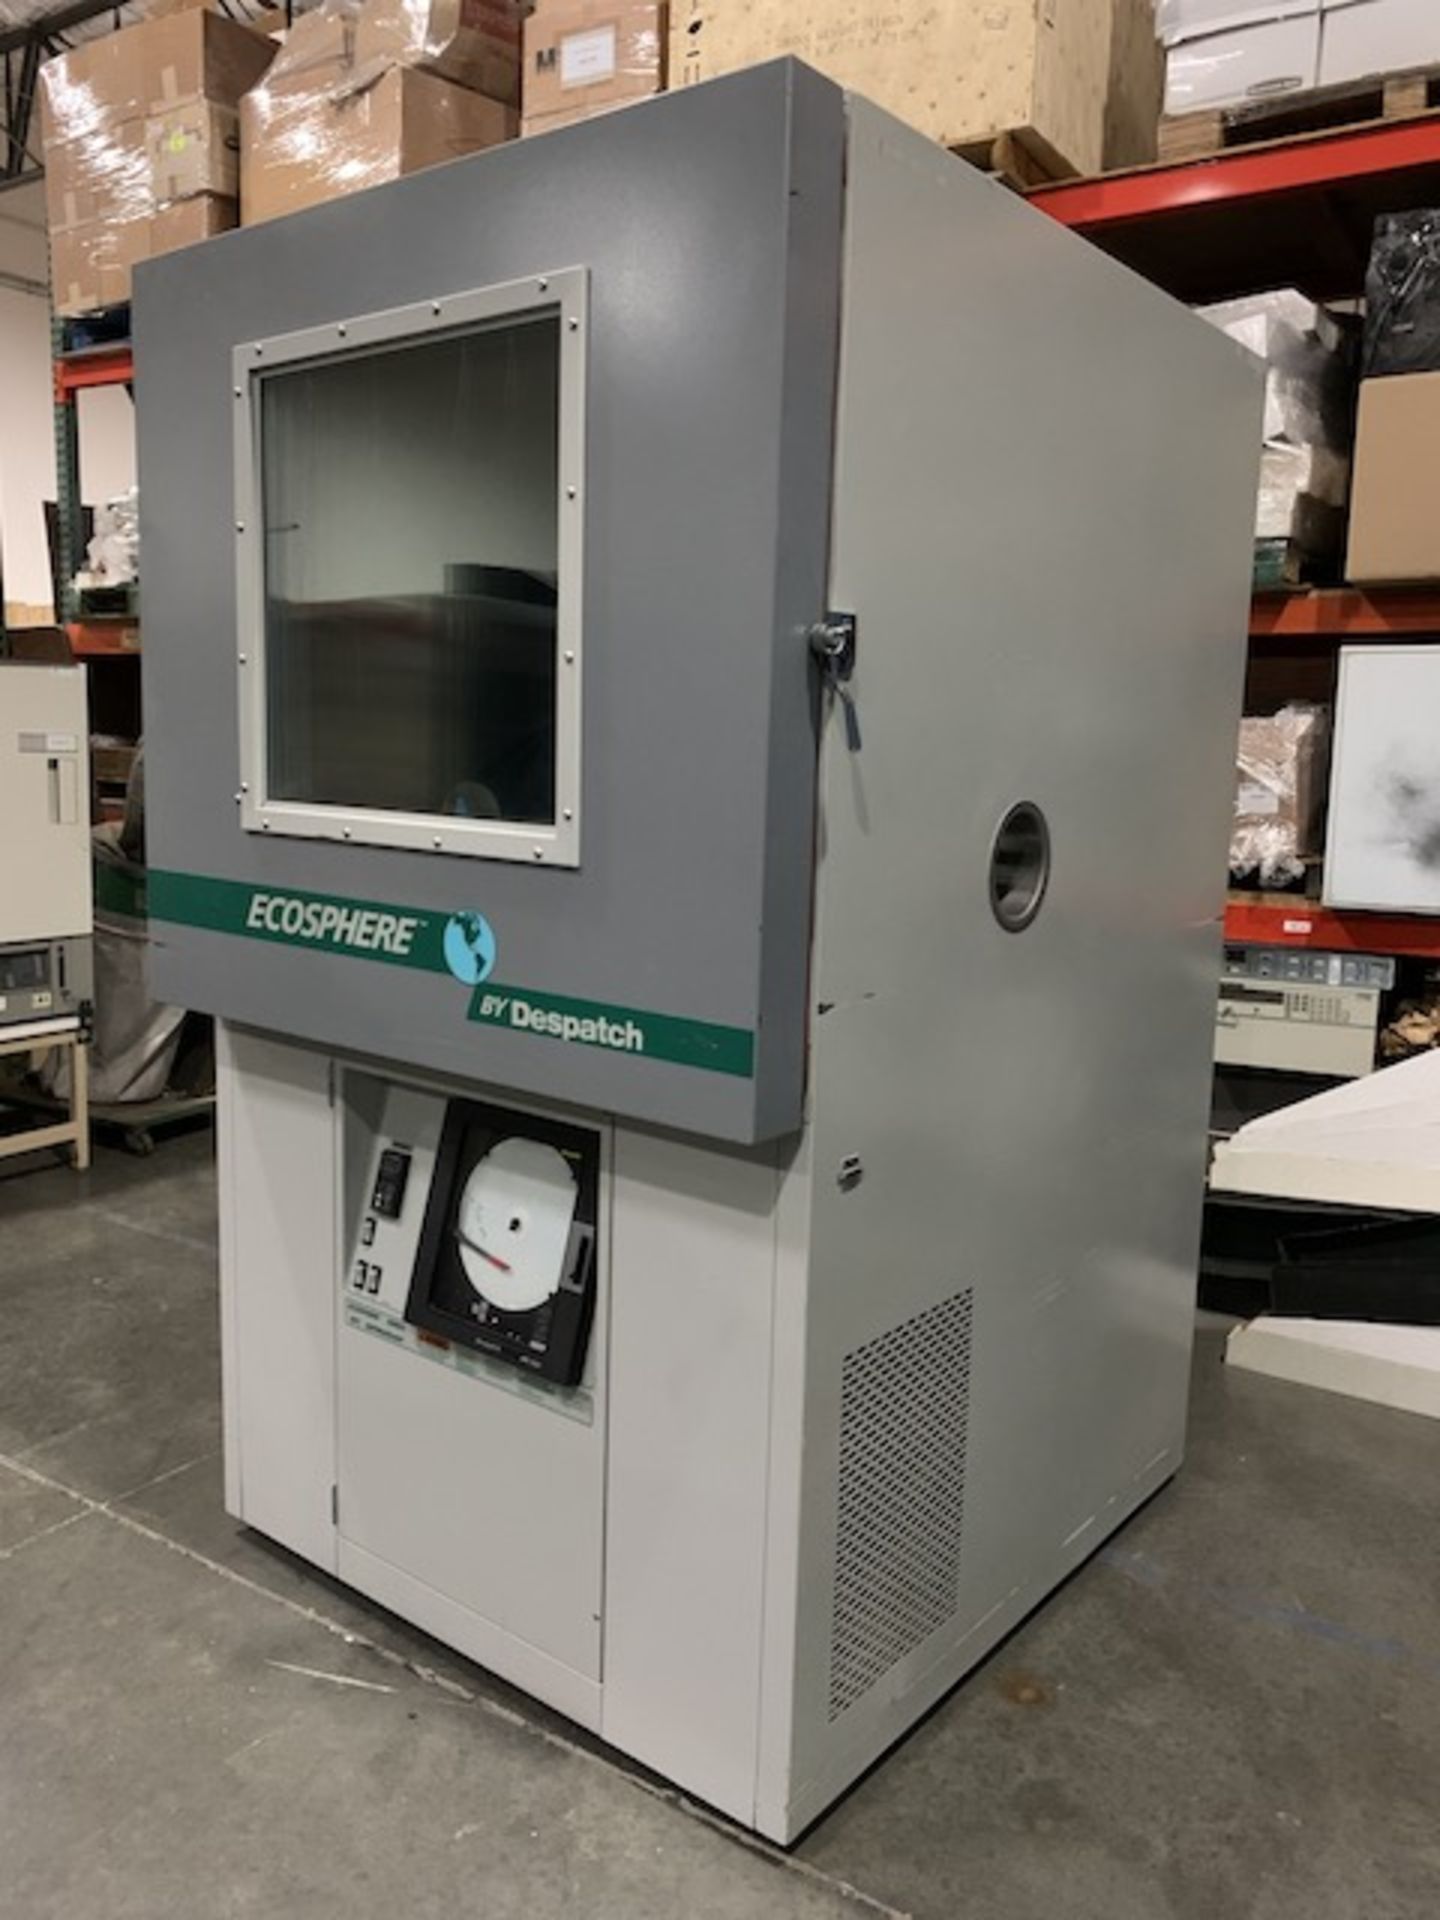 Despatch EC235 (16235H) Ecosphere Environmental Chamber - Image 9 of 10